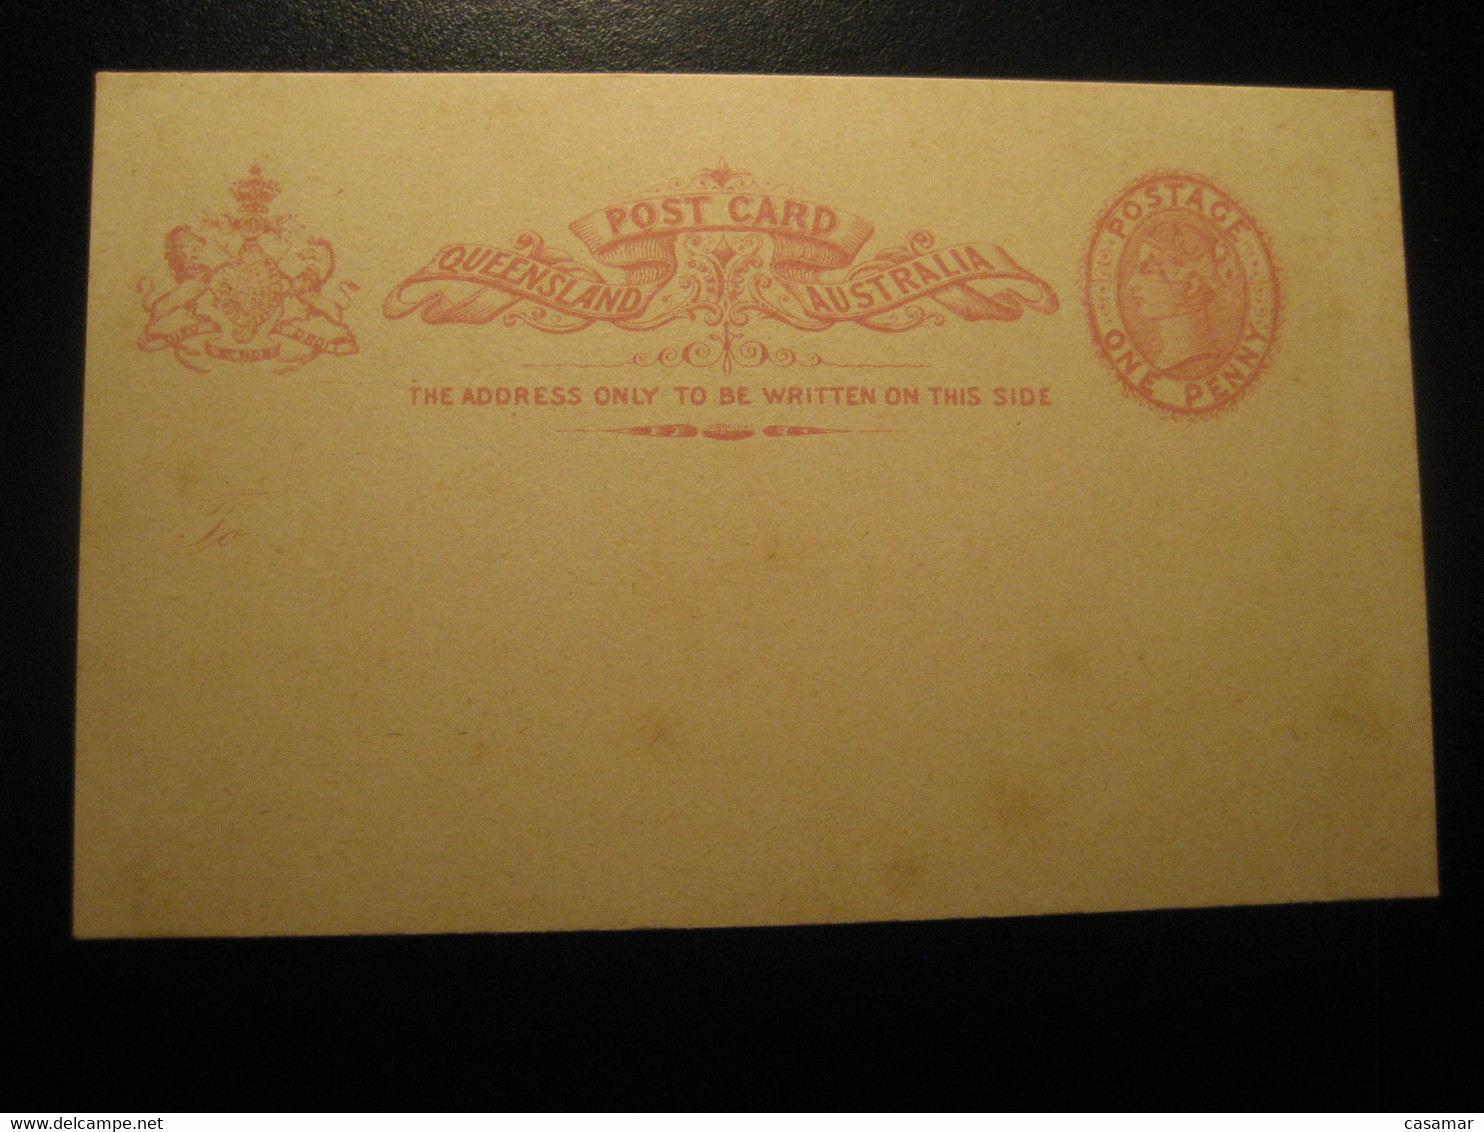 1 Penny QUEENSLAND Post Card AUSTRALIA Light Colour + No Lines Postal Stationery Card - Covers & Documents